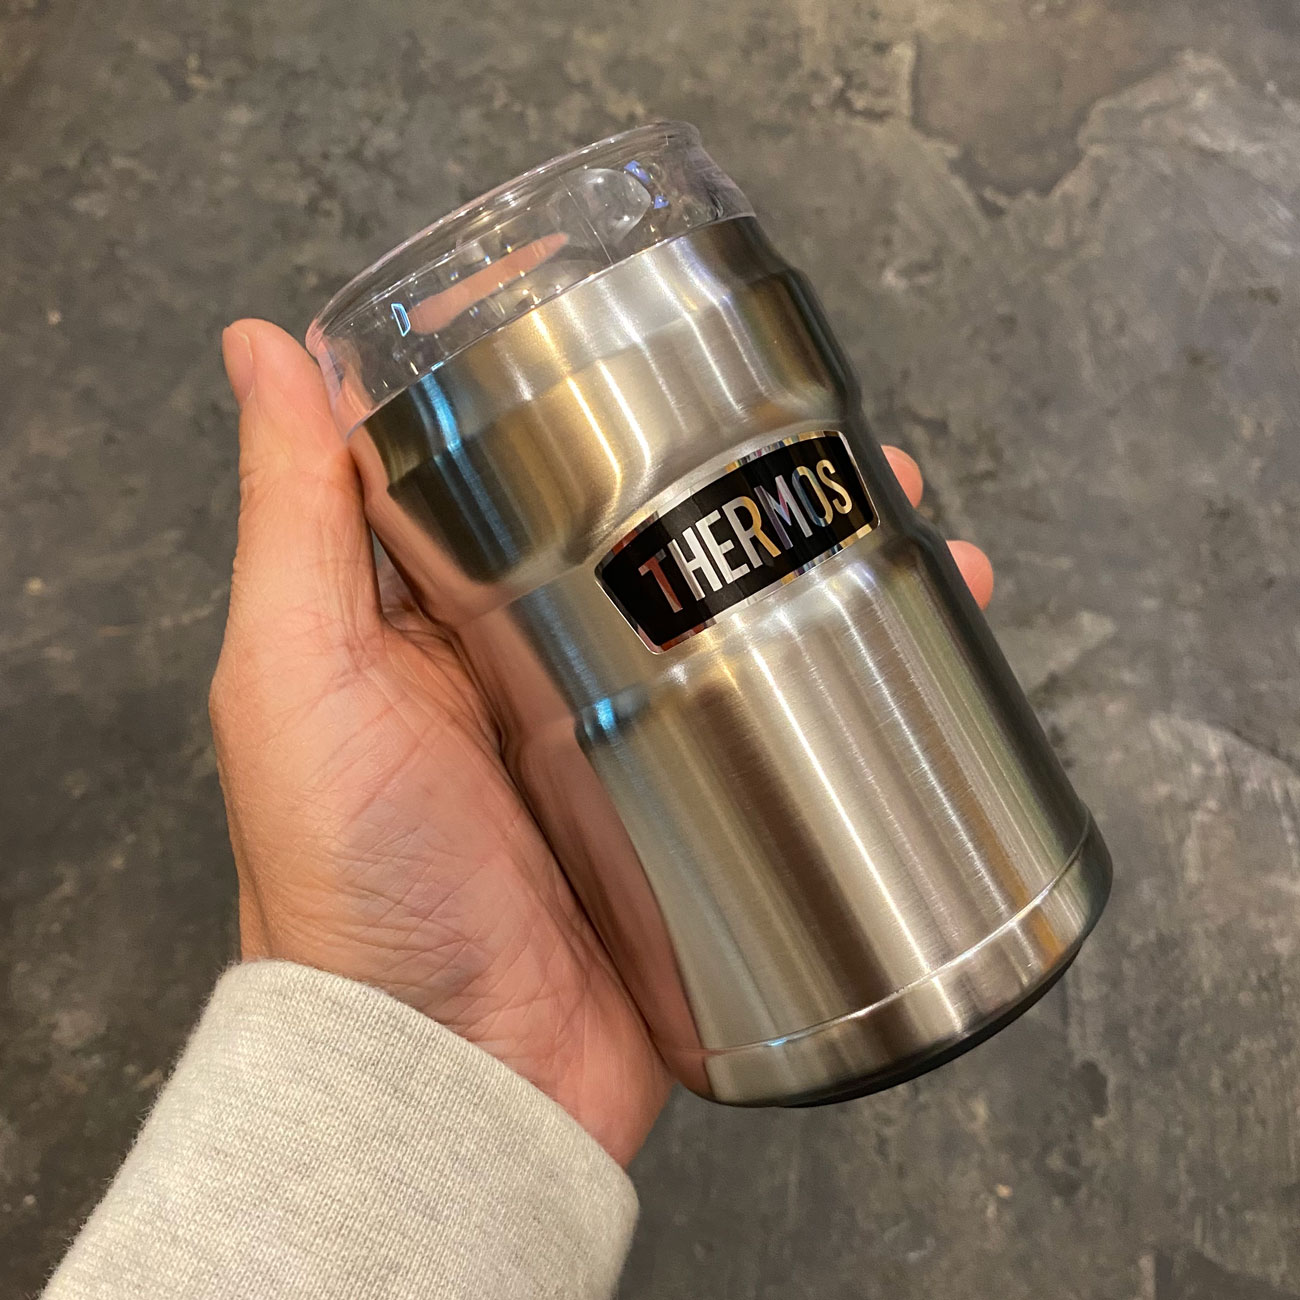 Thermos 真空断熱缶coozie タンブラー 350ml Highsox Skateboards